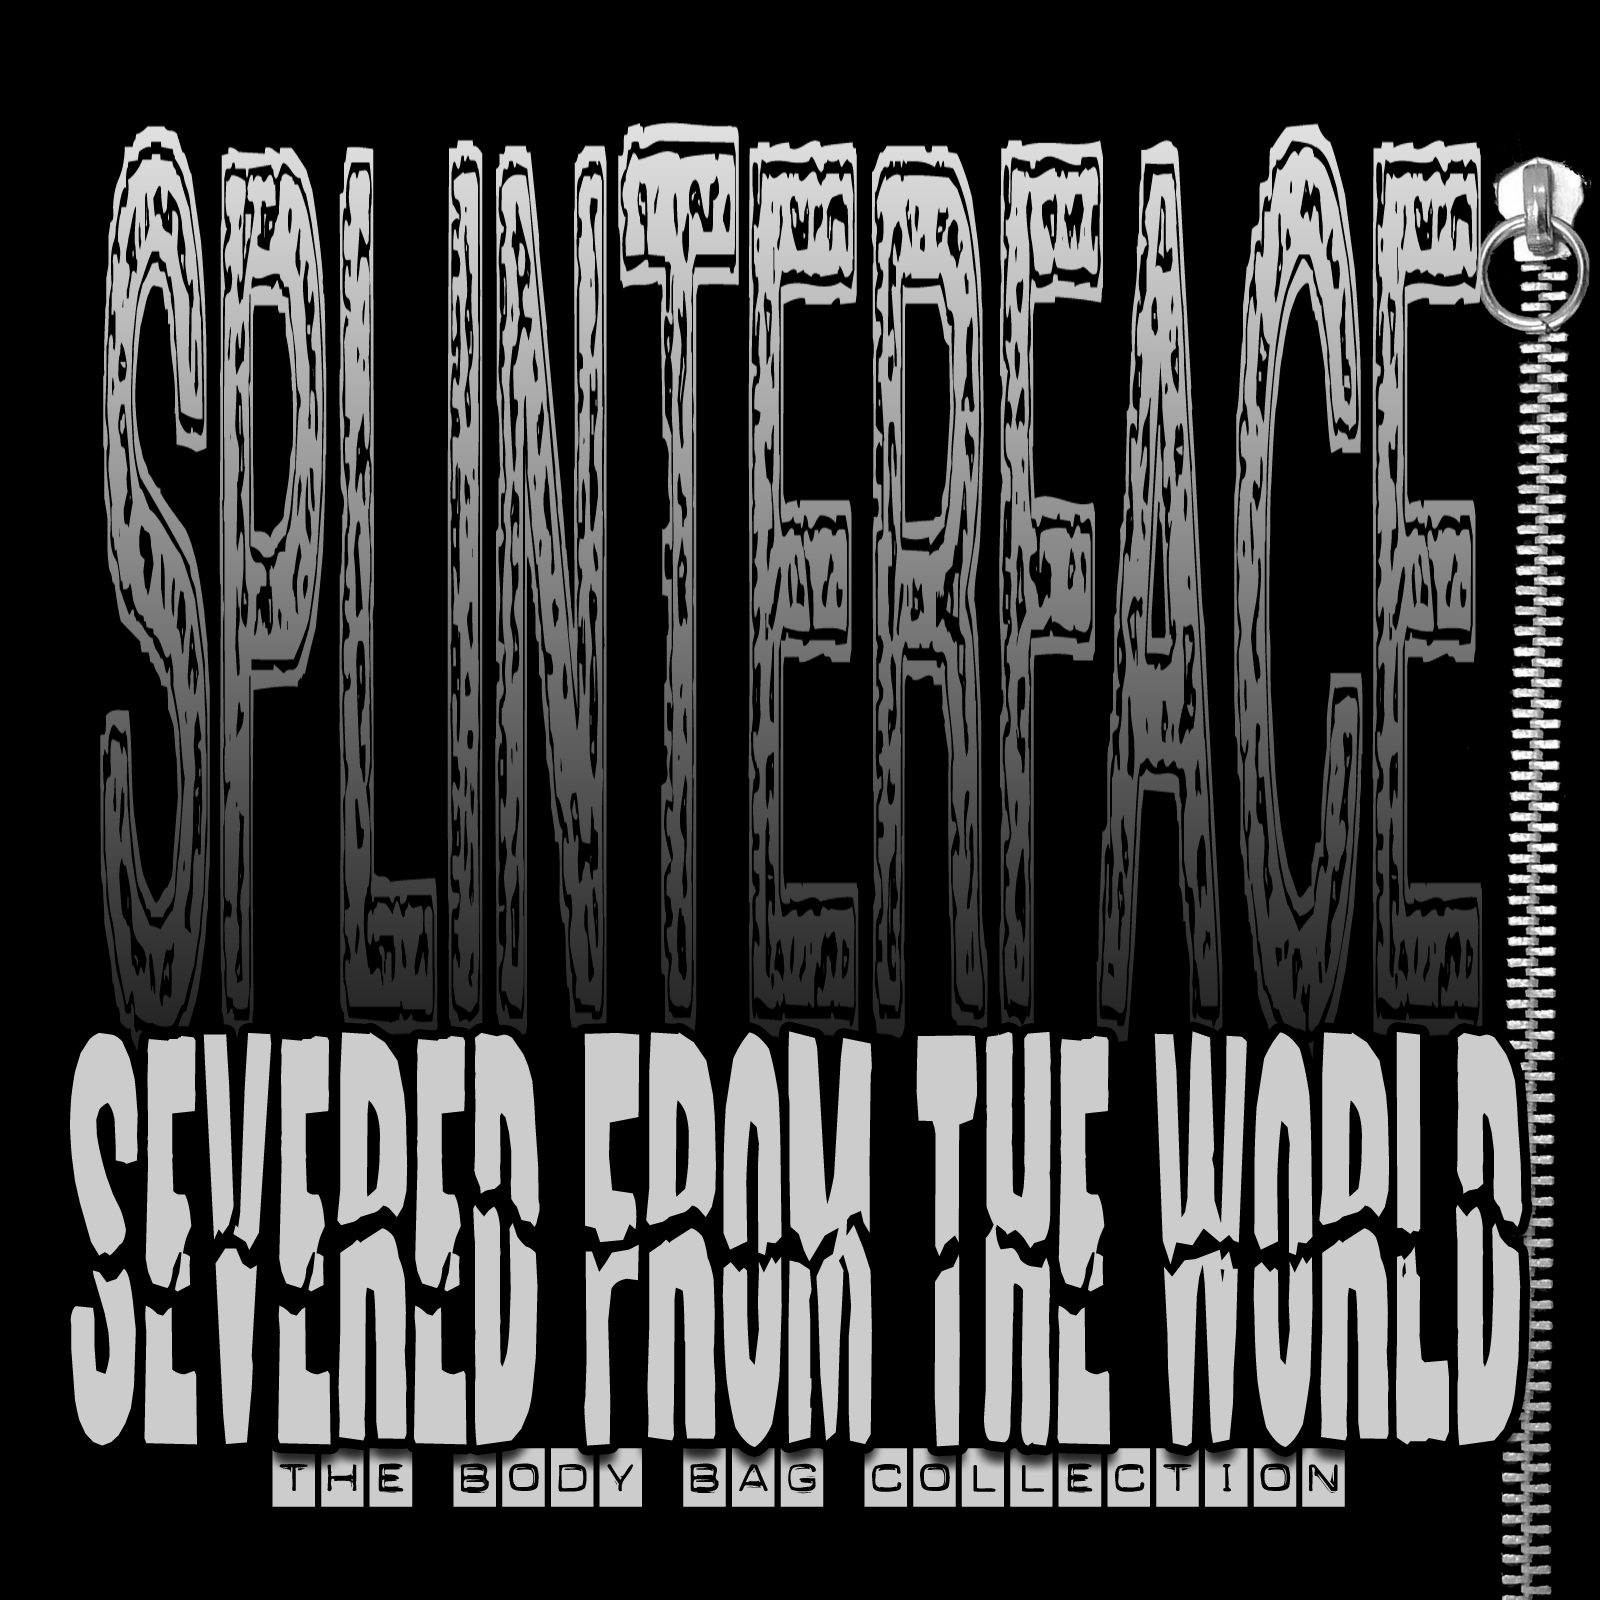 Splinterface - Severed From the World: The Body Bag Collection